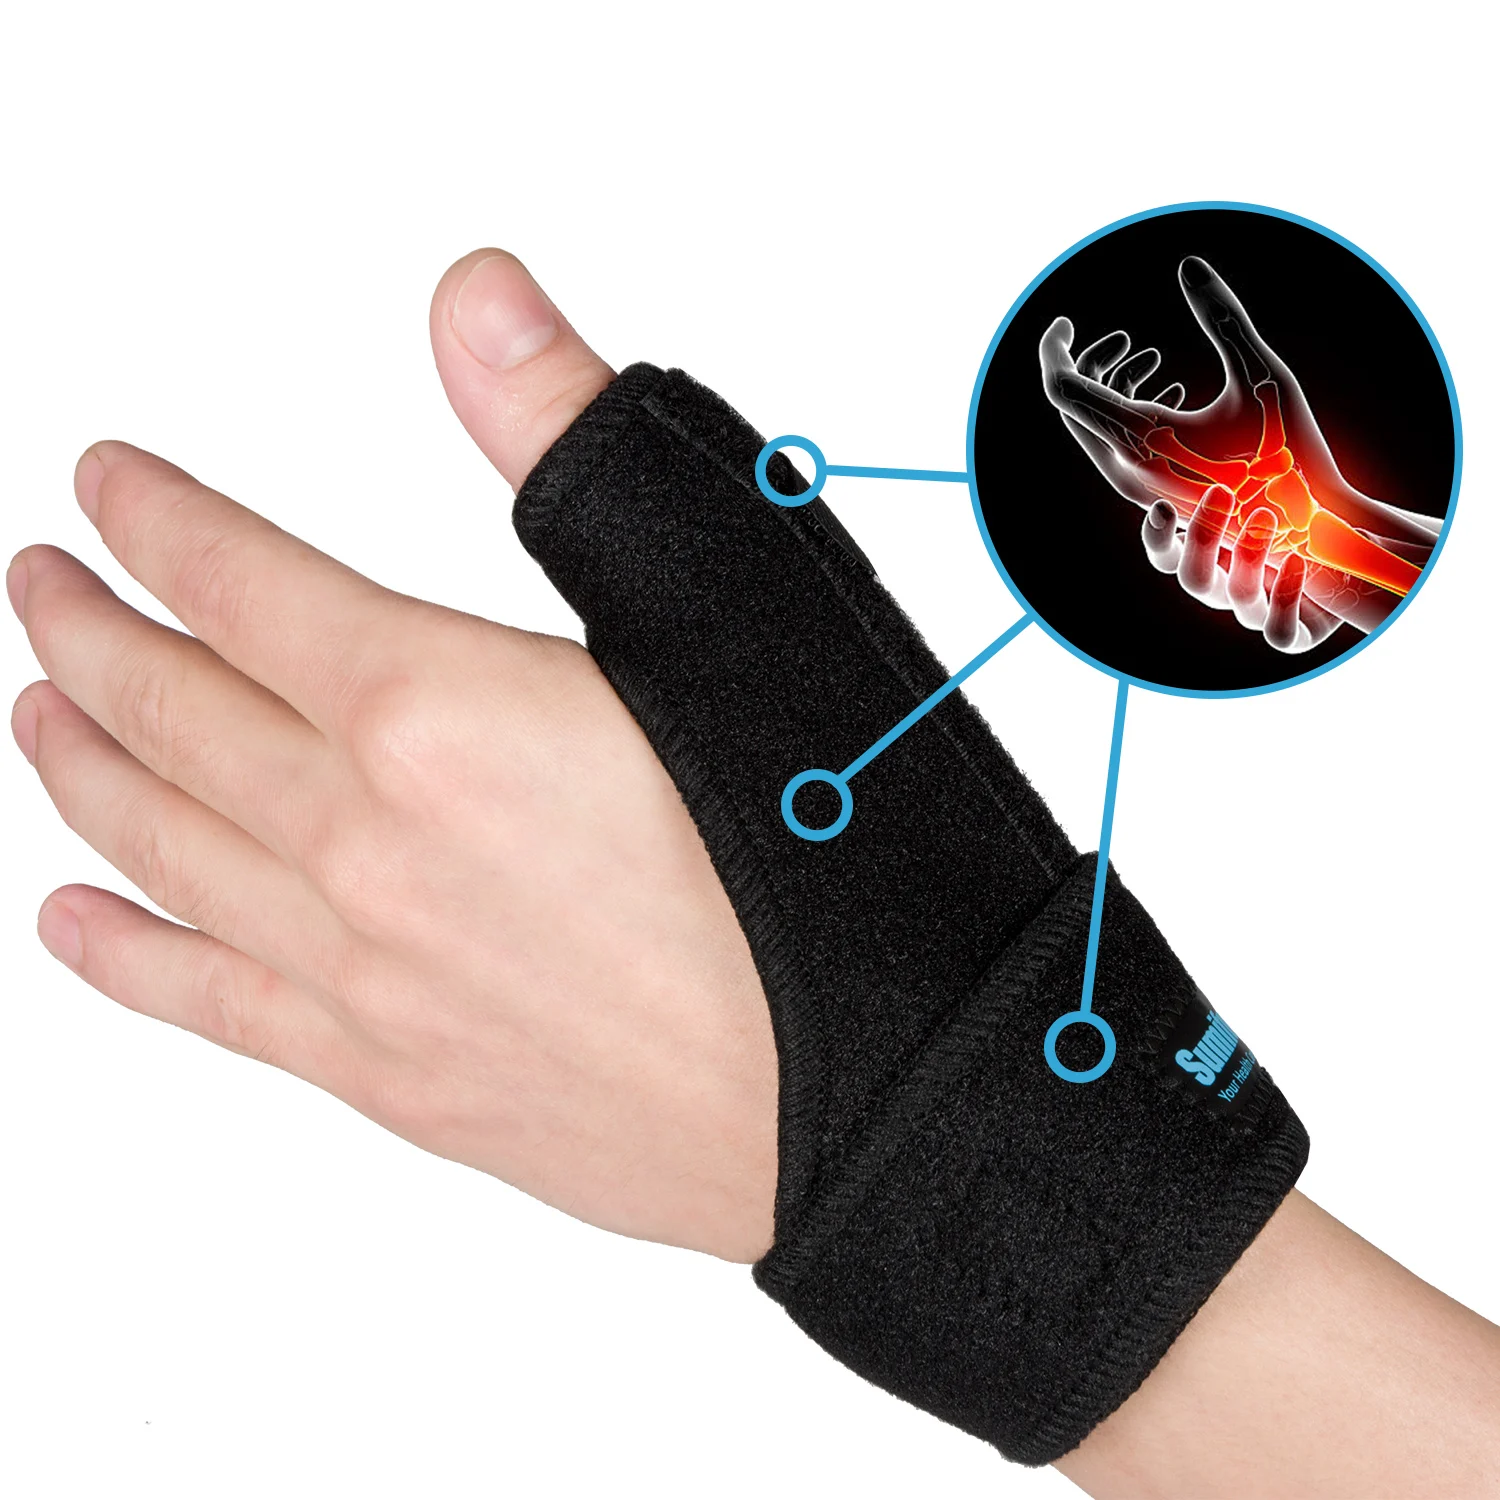 1pcs Hand Protecor Thumb Spica Wrist Brace Splint Support for Arthritis Tendonitis Carpal Tunnel Pain Relief C1572 a5 size handmade 3d resin cover dragon notebook hand book diary book high beauty relief hand account book